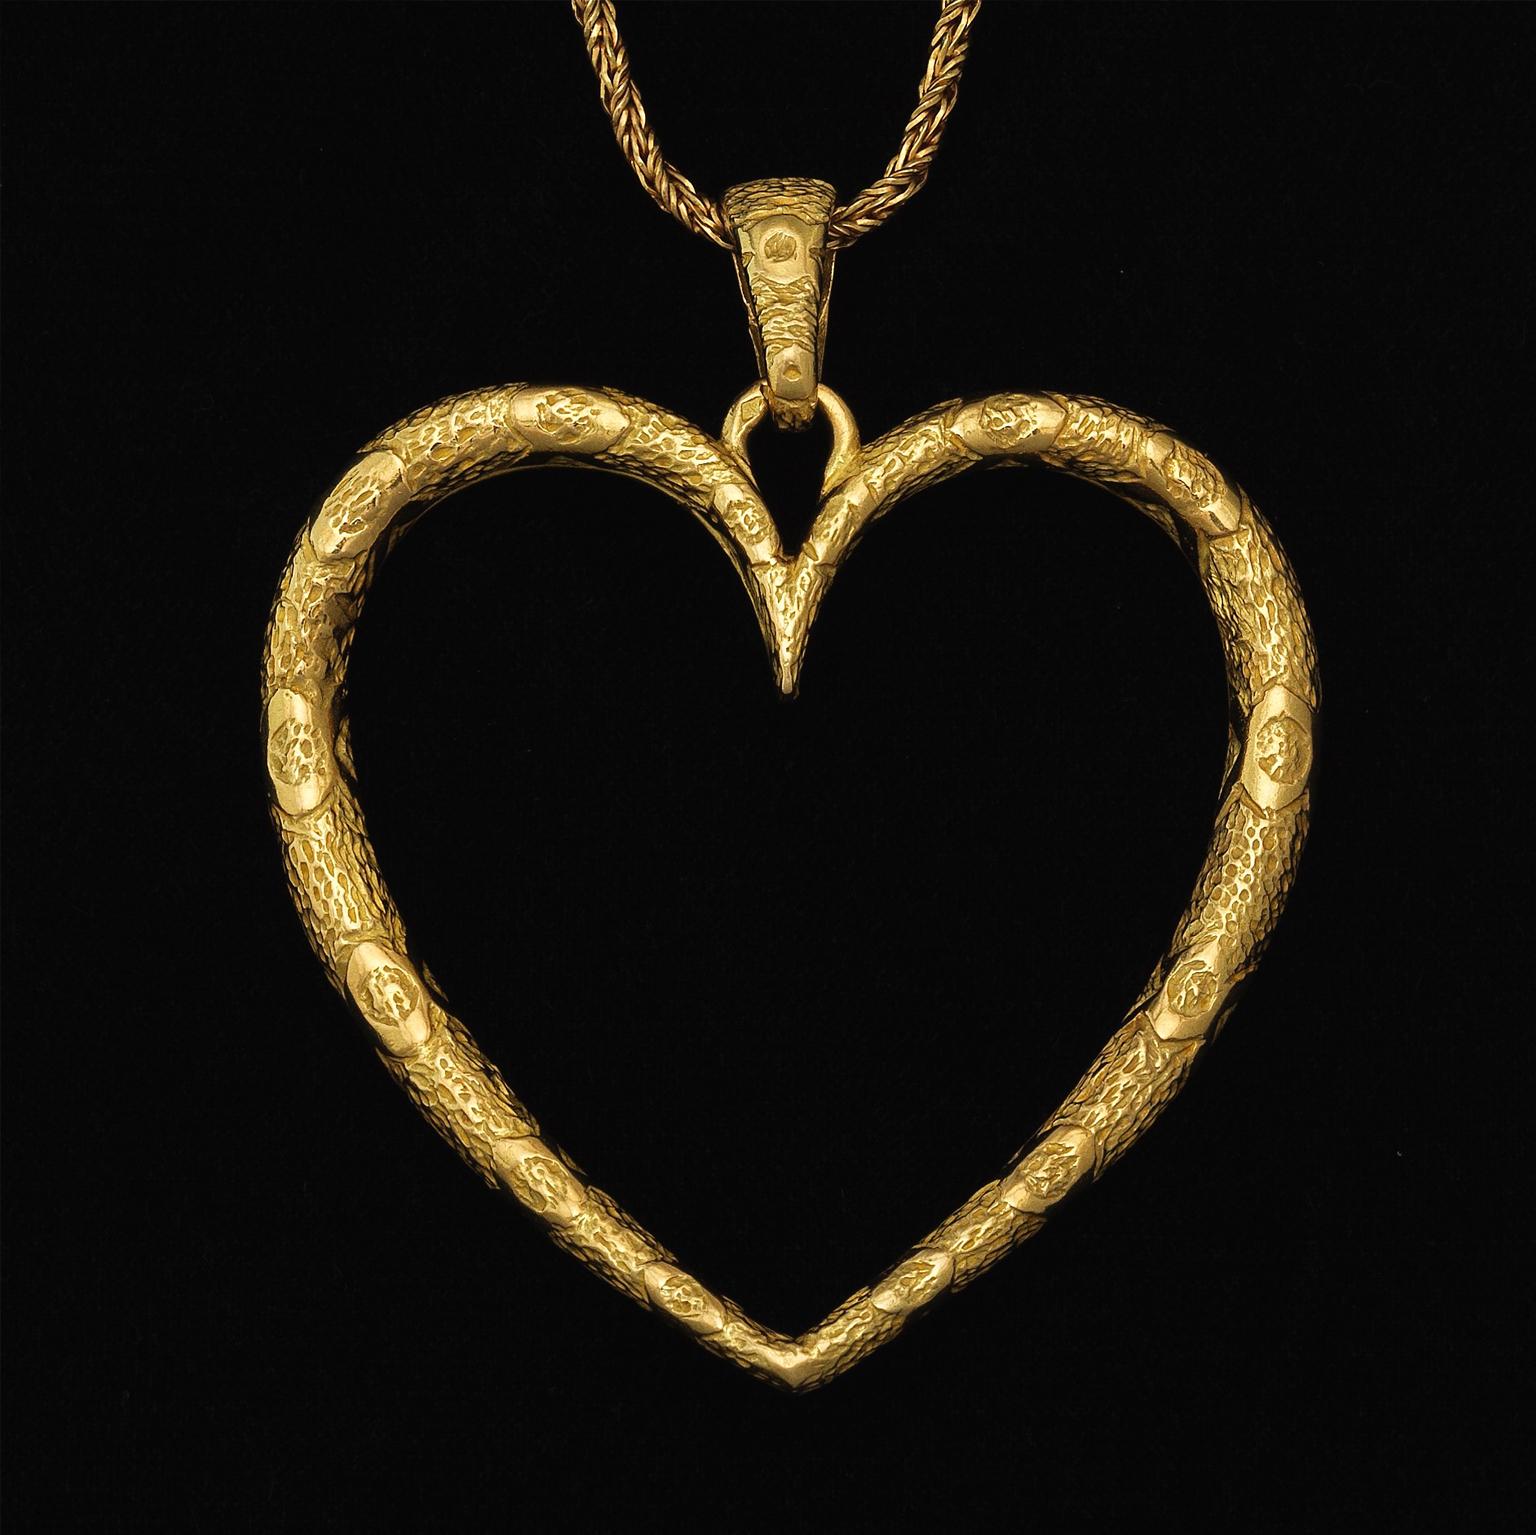 An 18 carat yellow gold braided chain with a huge oversized heart pendant with large bail, hand chased textured finish; marked on the clasp and signed on the pendant: 5616 N.M. (For Neiman Marcus), Made in France, circa 1970.

weight: 37.2